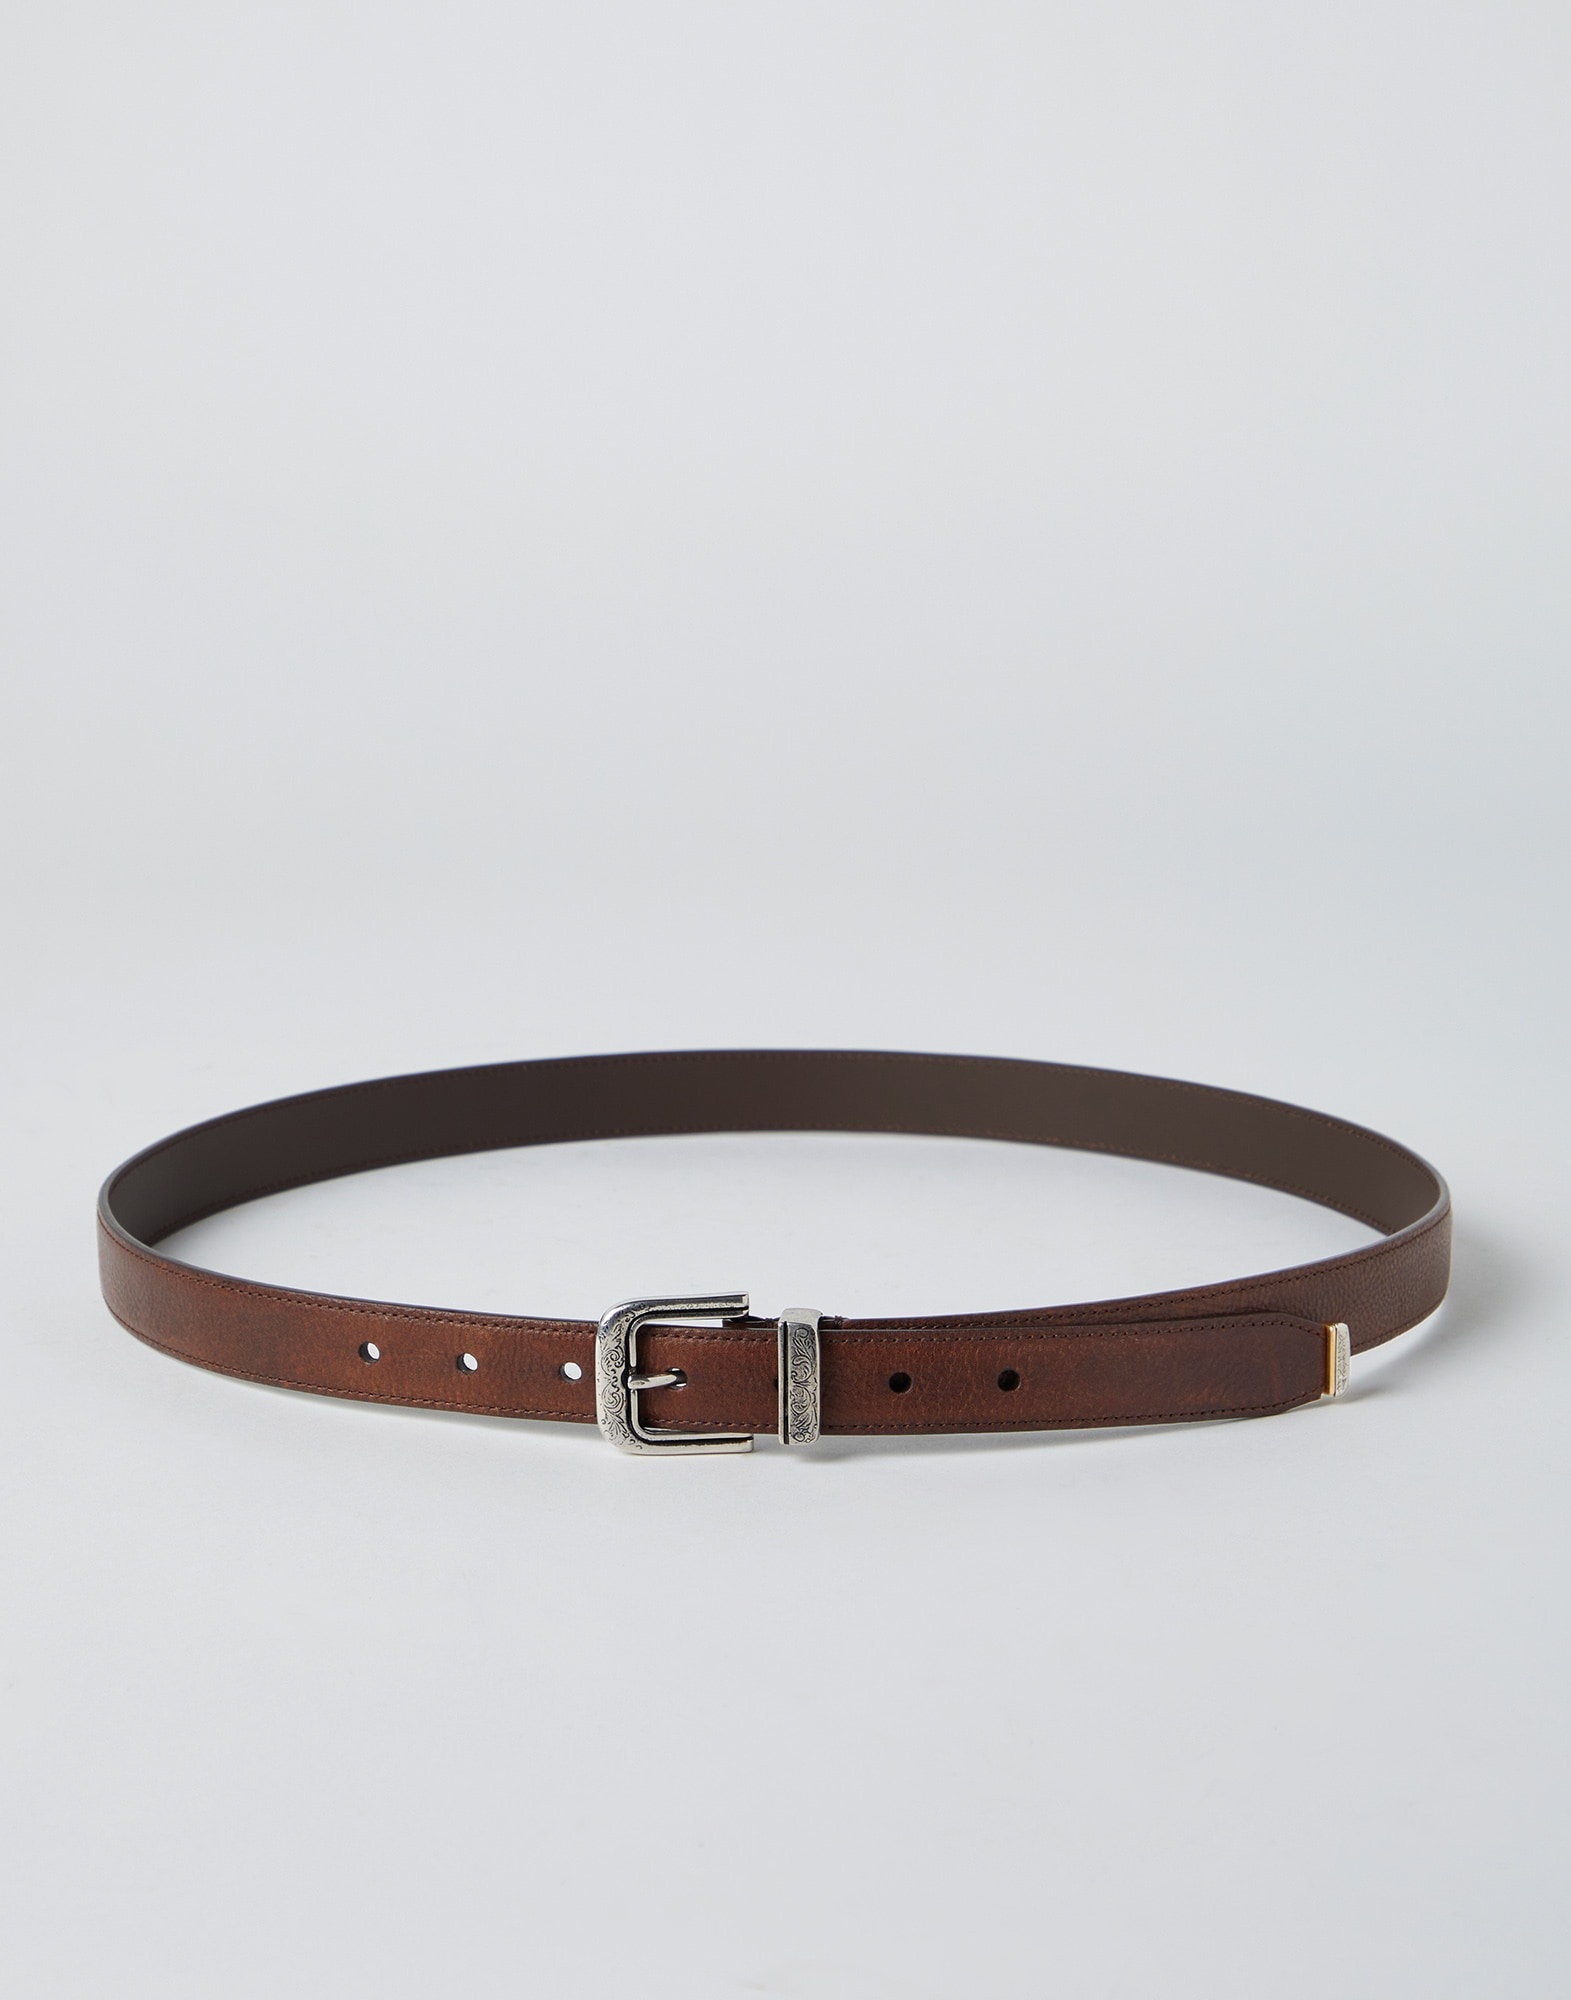 Blotted calfskin belt with detailed buckle and tip - 1